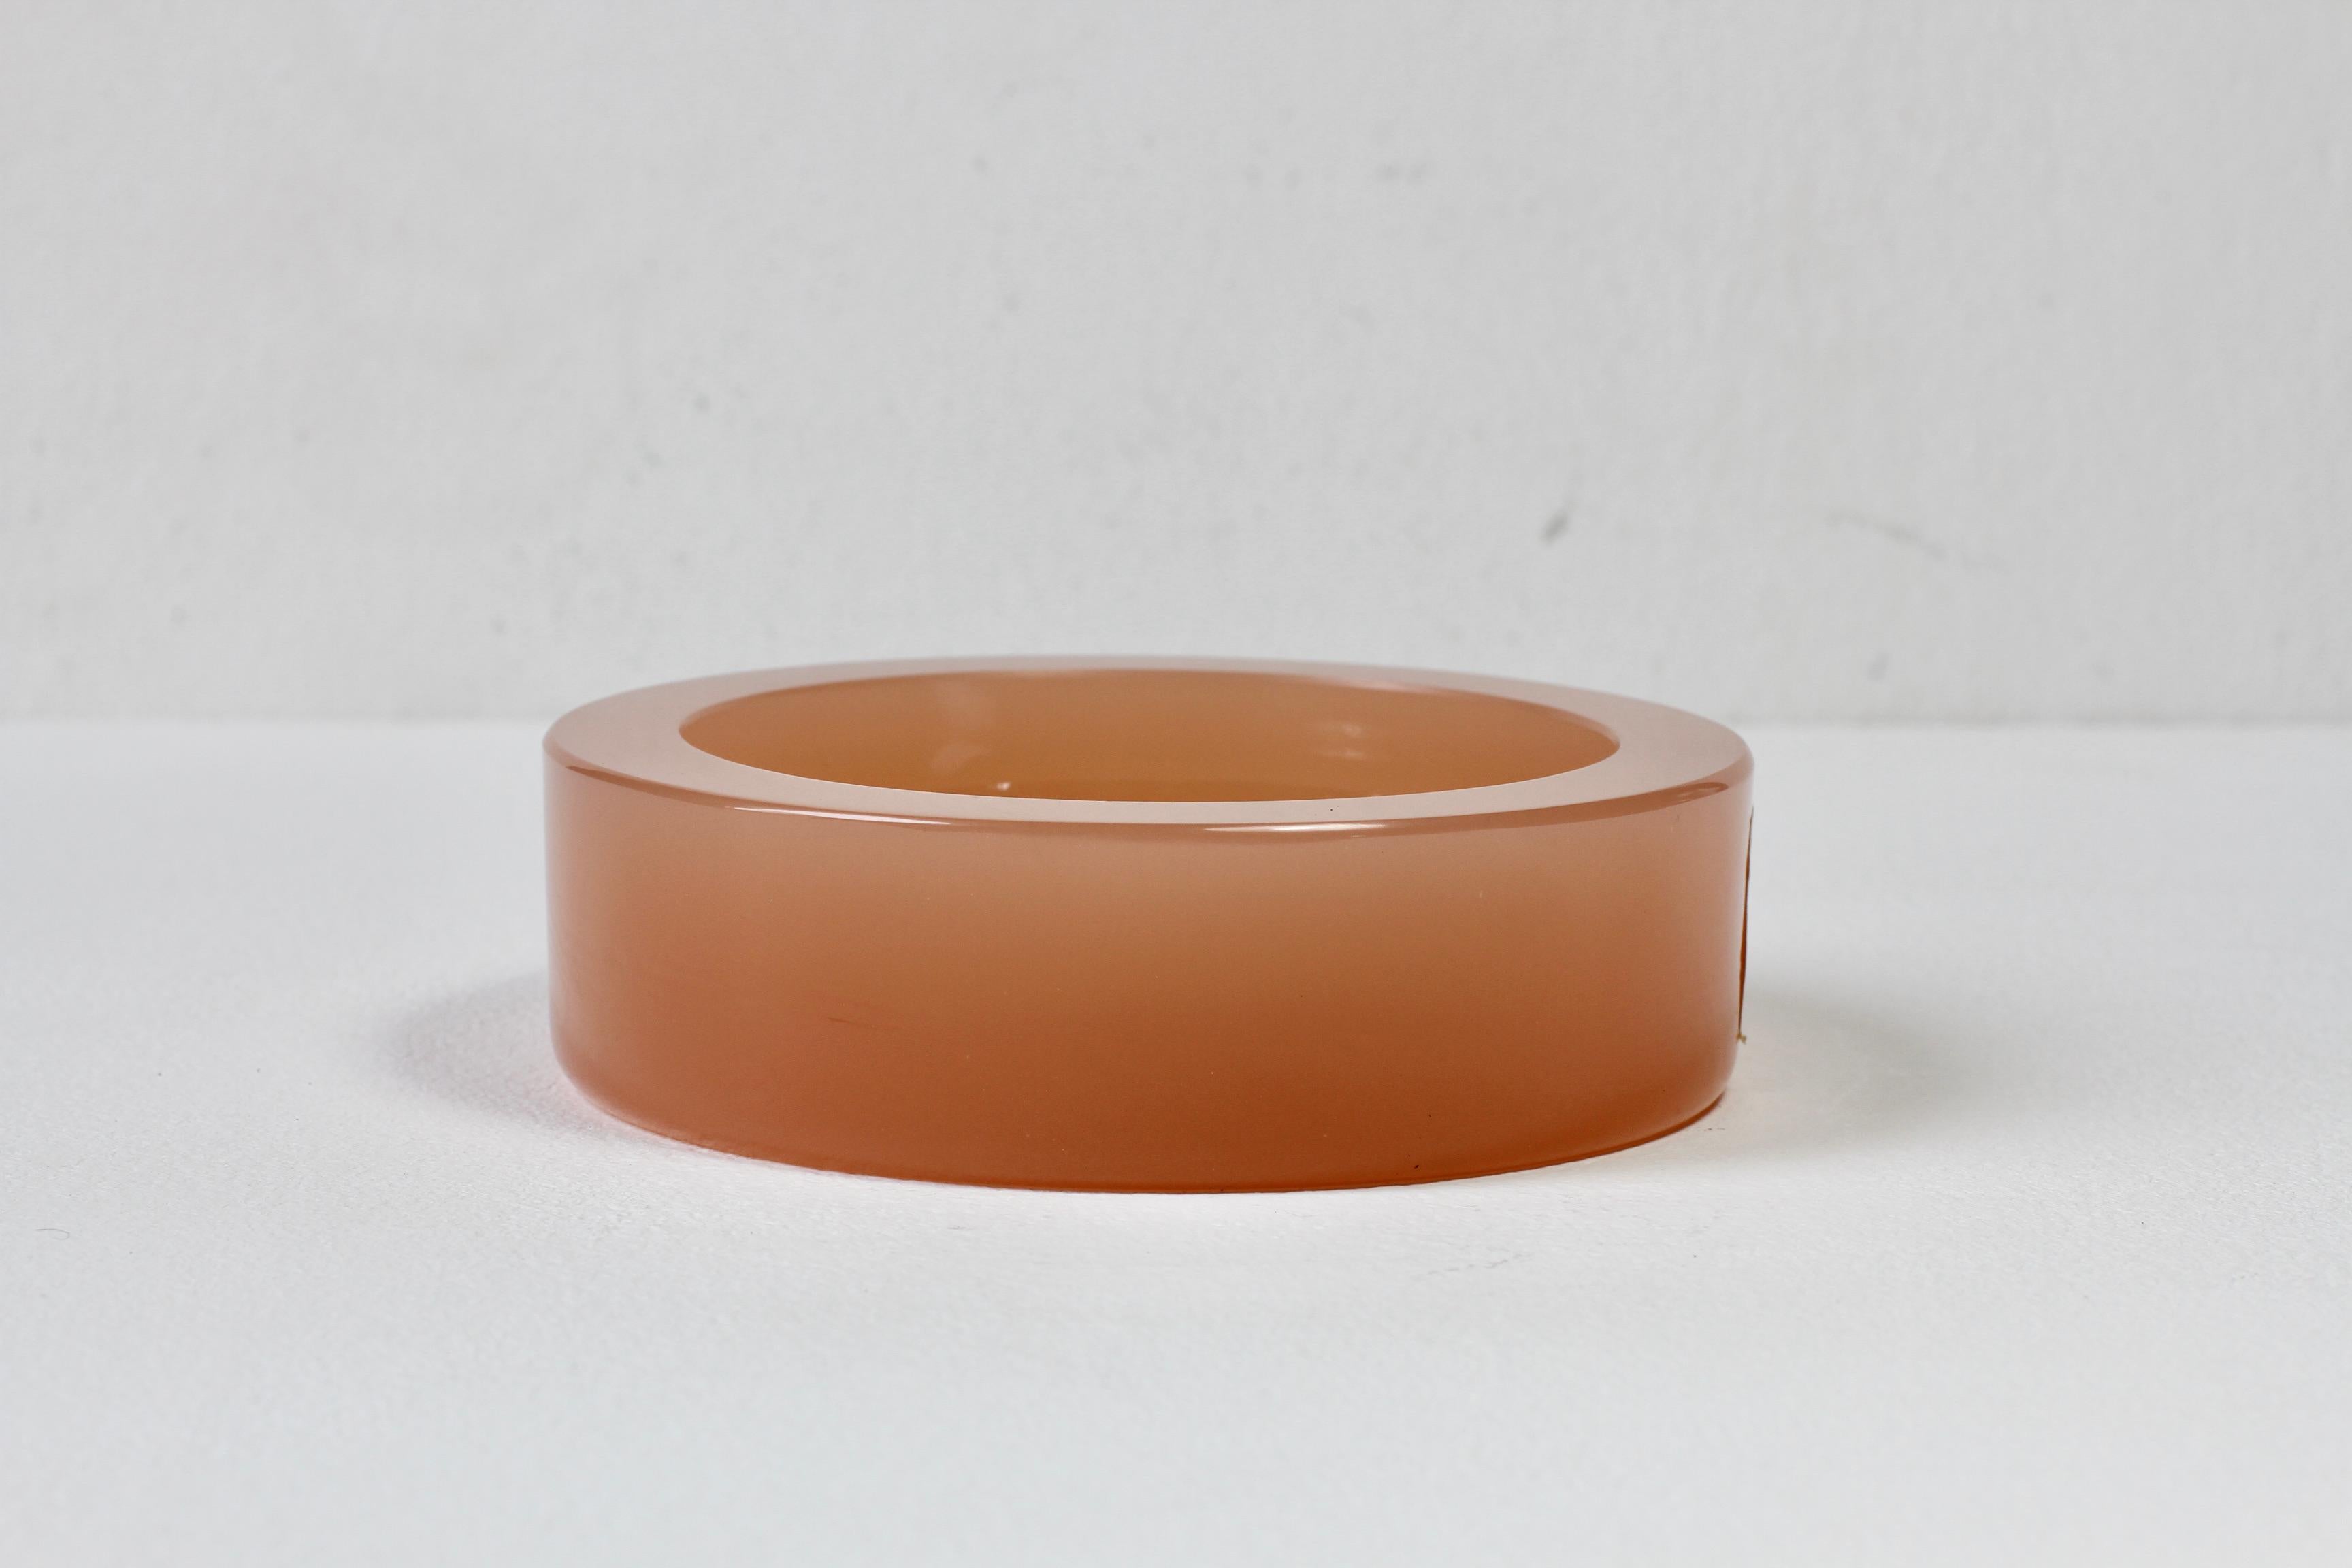 Cenedese Venetian Mid-Century vintage modern pretty Murano opaline dusty pink colored / coloured glass round circular dish, bowl or ashtray. Wonderful vintage Mid-Century Italian glass and perfect for serving sweets or snacks in the kitchen, lounge